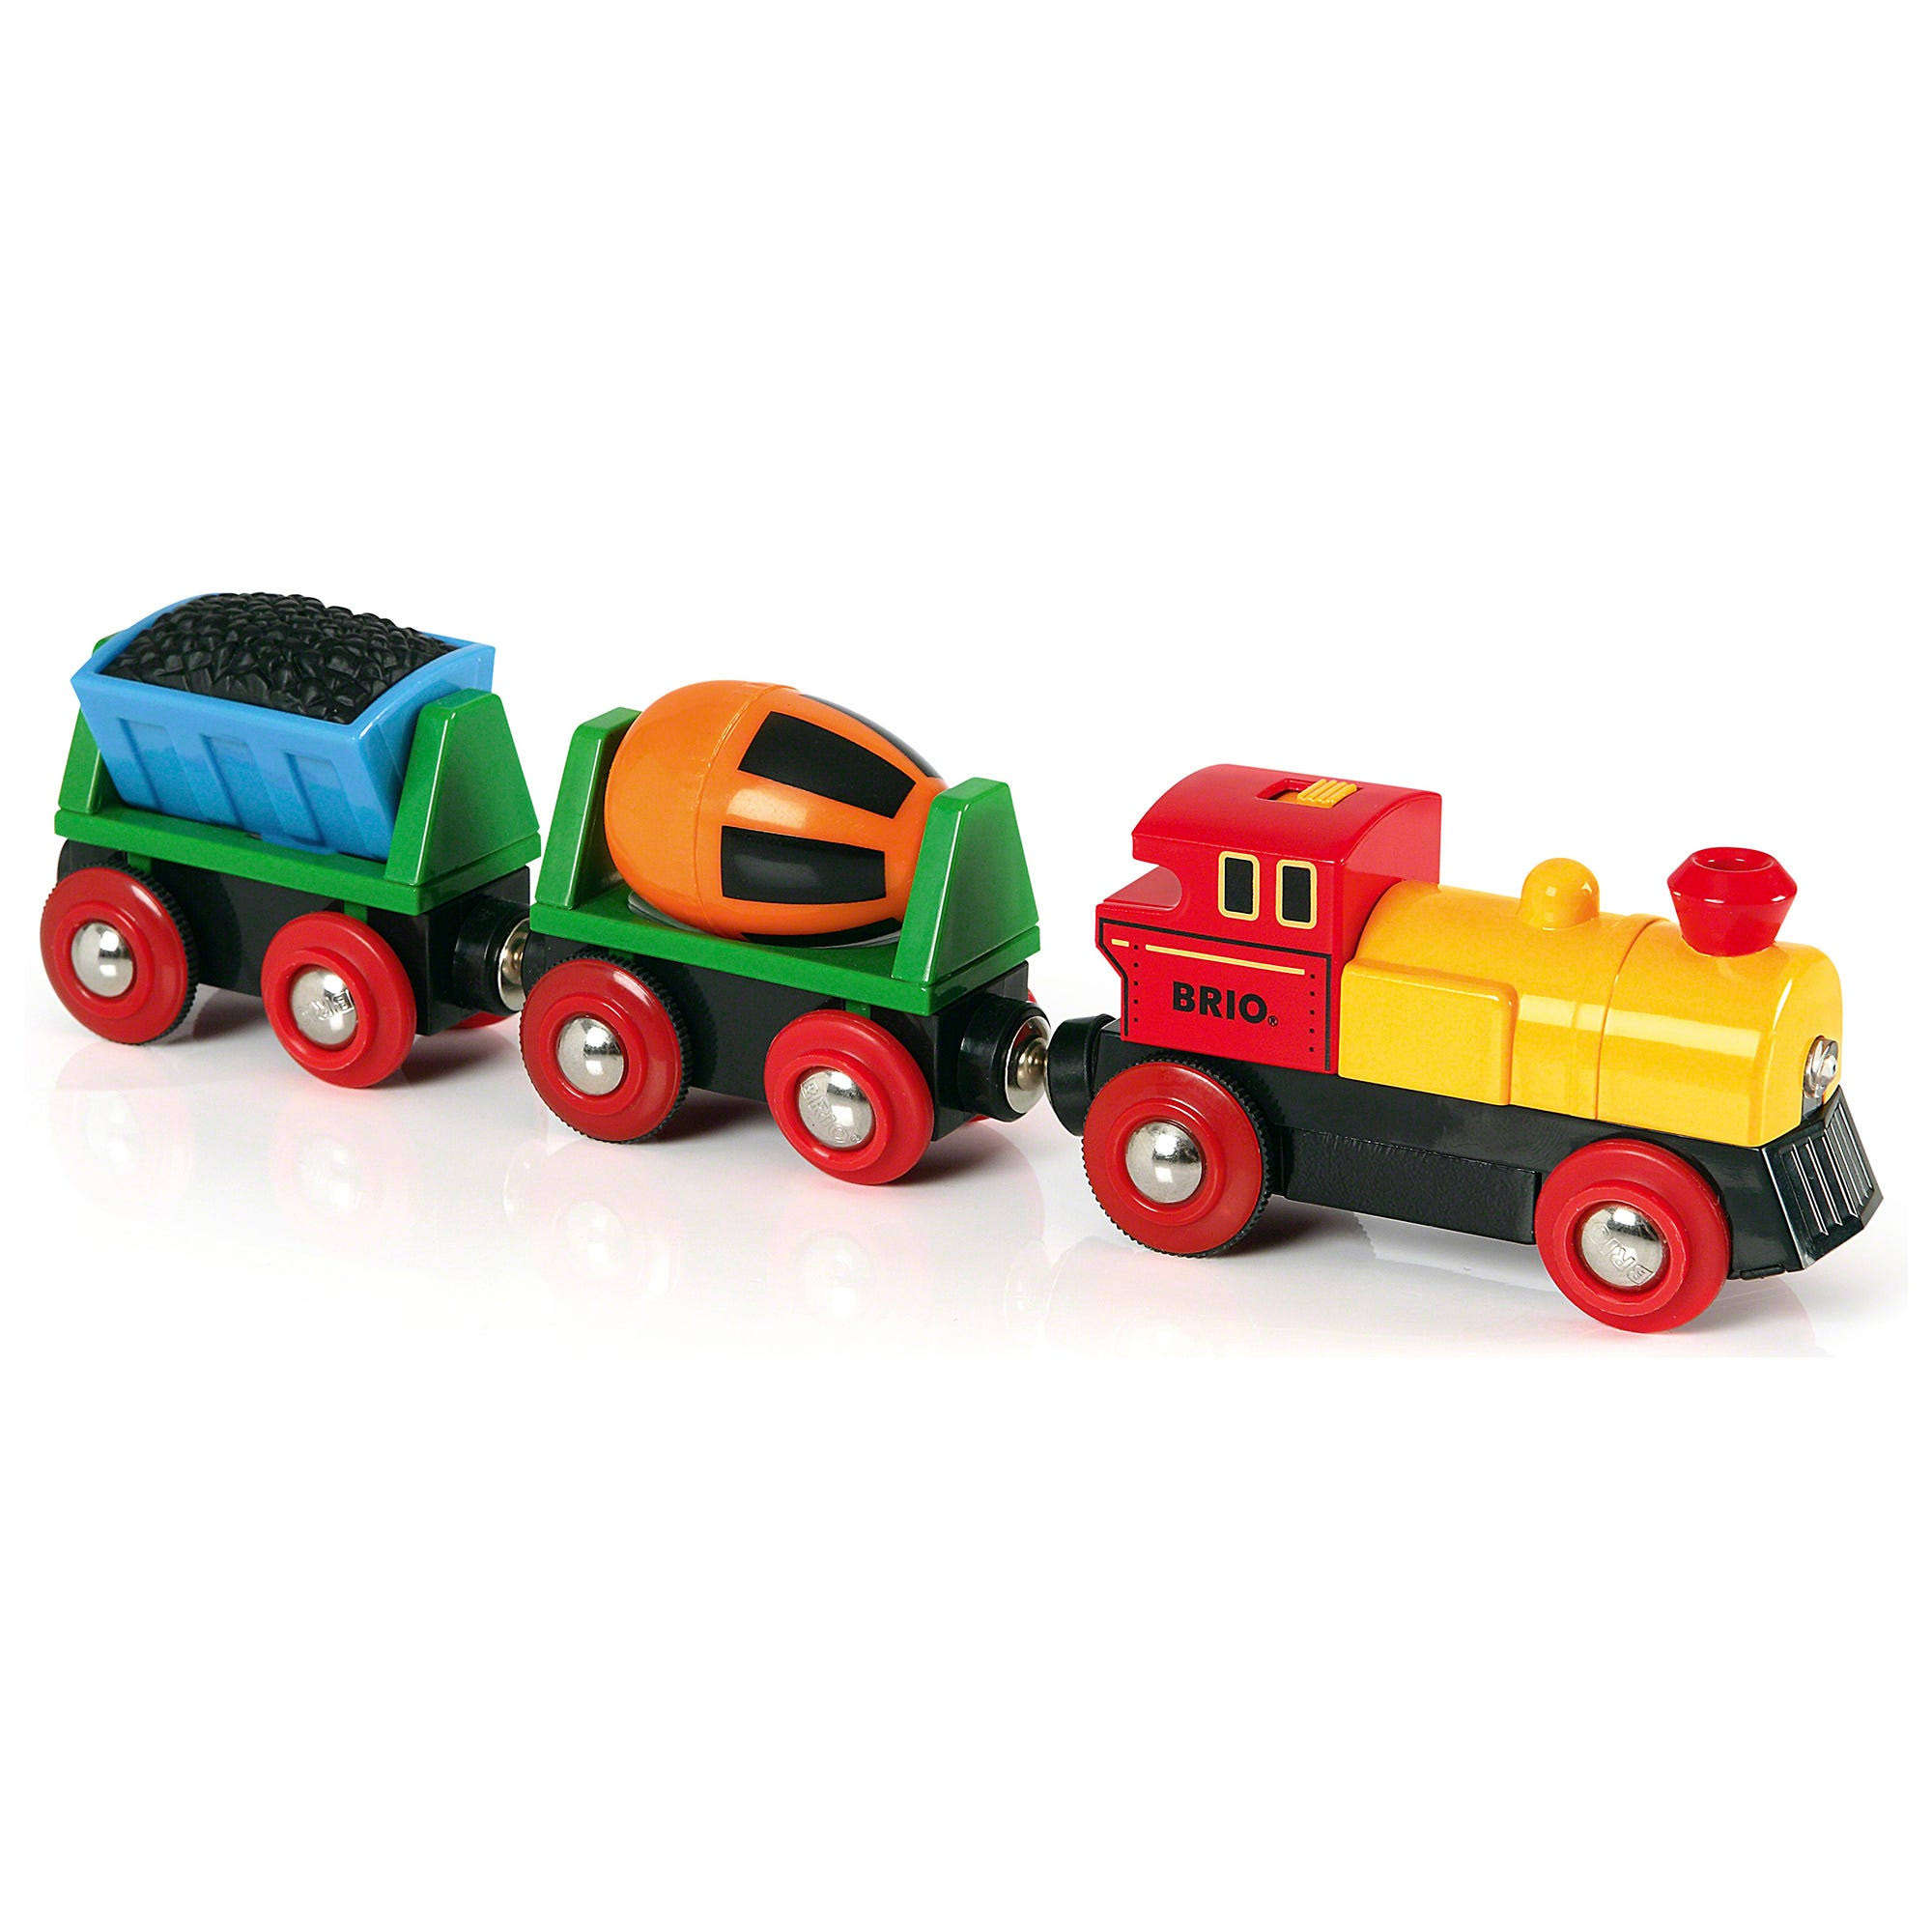 Brio Battery Operated Action Train Toy